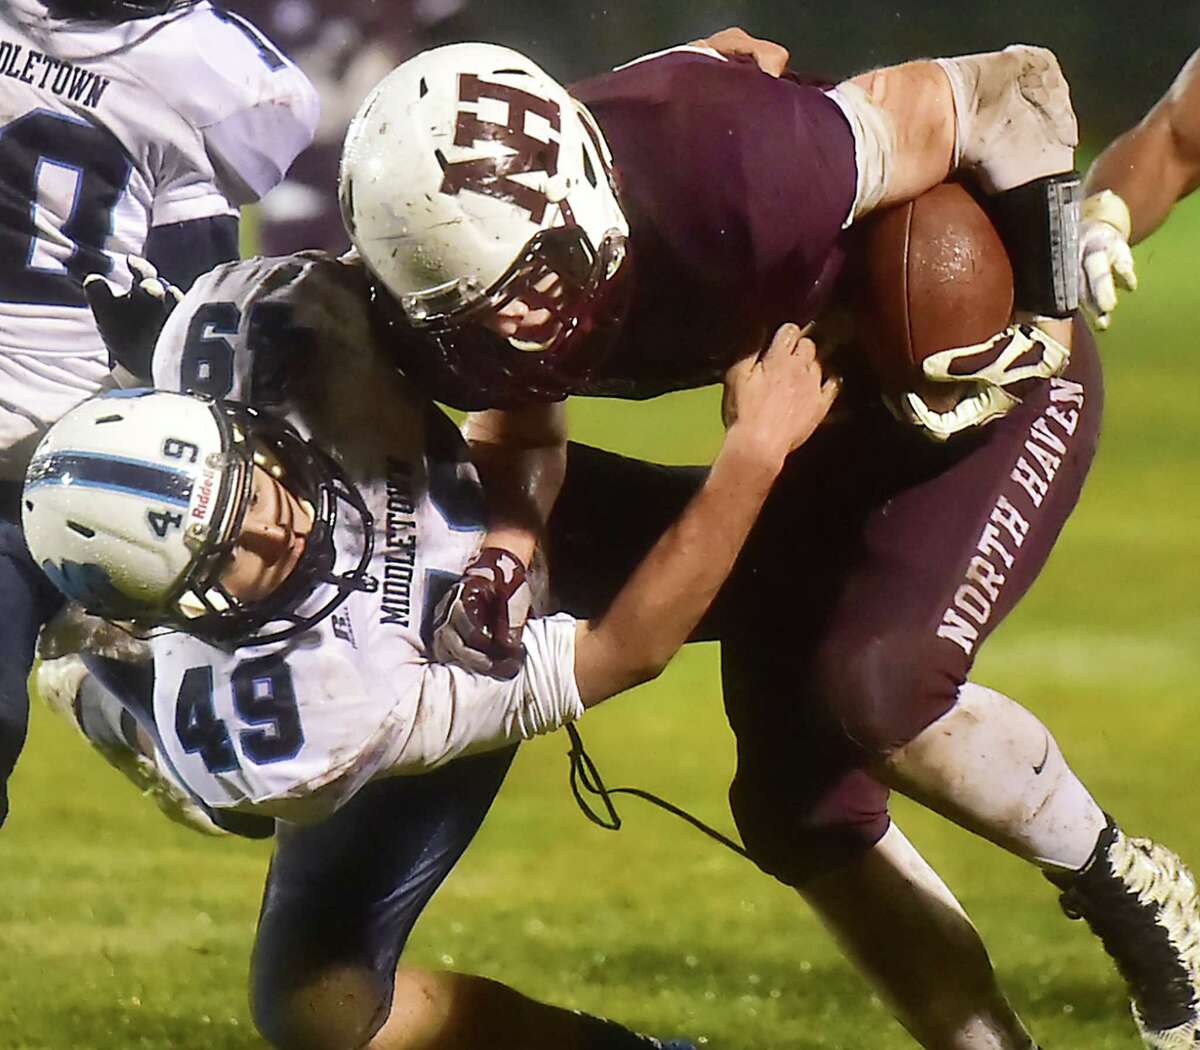 North Haven’s Conner Suraci is tackled by Middletown’s Michael Souza as the Indians defeat the Middletown Blue Dragons, 48-13, in the Class L state football quarterfinal game, Tuesday, December 1, 2015, at Vanacore Field at the North Haven Athletic Complex. (Catherine Avalone/New Haven Register)